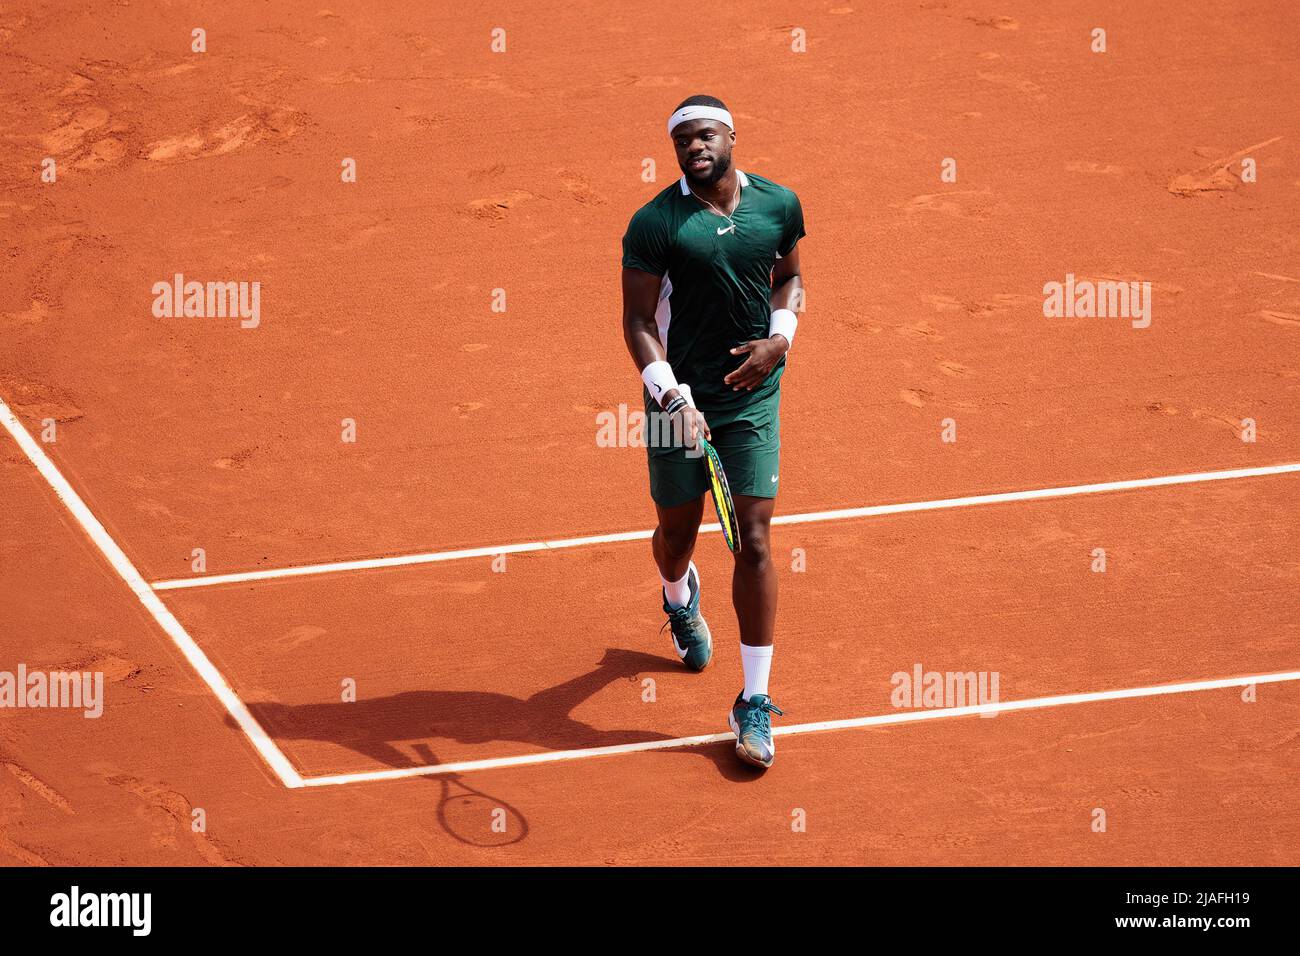 BARCELONA - APR 22: Frances Tiafoe in action during the Barcelona Open Banc  Sabadell Tennis Tournament at Real Club De Tenis Barcelona on April 22, 20  Stock Photo - Alamy